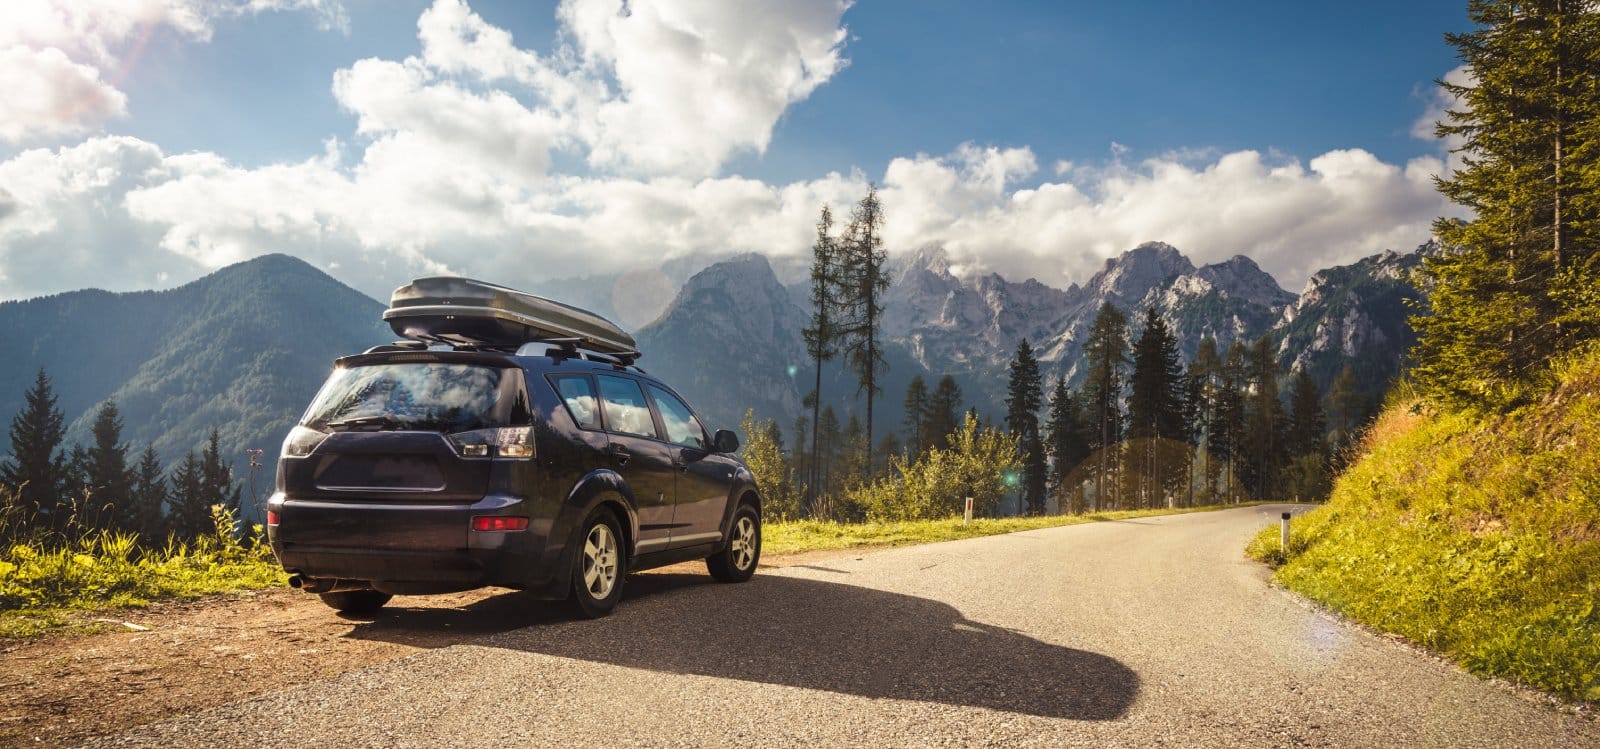 <p class="wp-caption-text">Image Credit: Shutterstock / Nickolya</p>  <p><span>Choosing the right vehicle is paramount for a successful road trip. Consider the terrain you’ll be traversing, the number of passengers, and the amount of luggage you’ll carry. For rugged landscapes, an SUV or a vehicle with high clearance and 4WD might be necessary, while for long highway stretches, a comfortable sedan may suffice.</span></p>